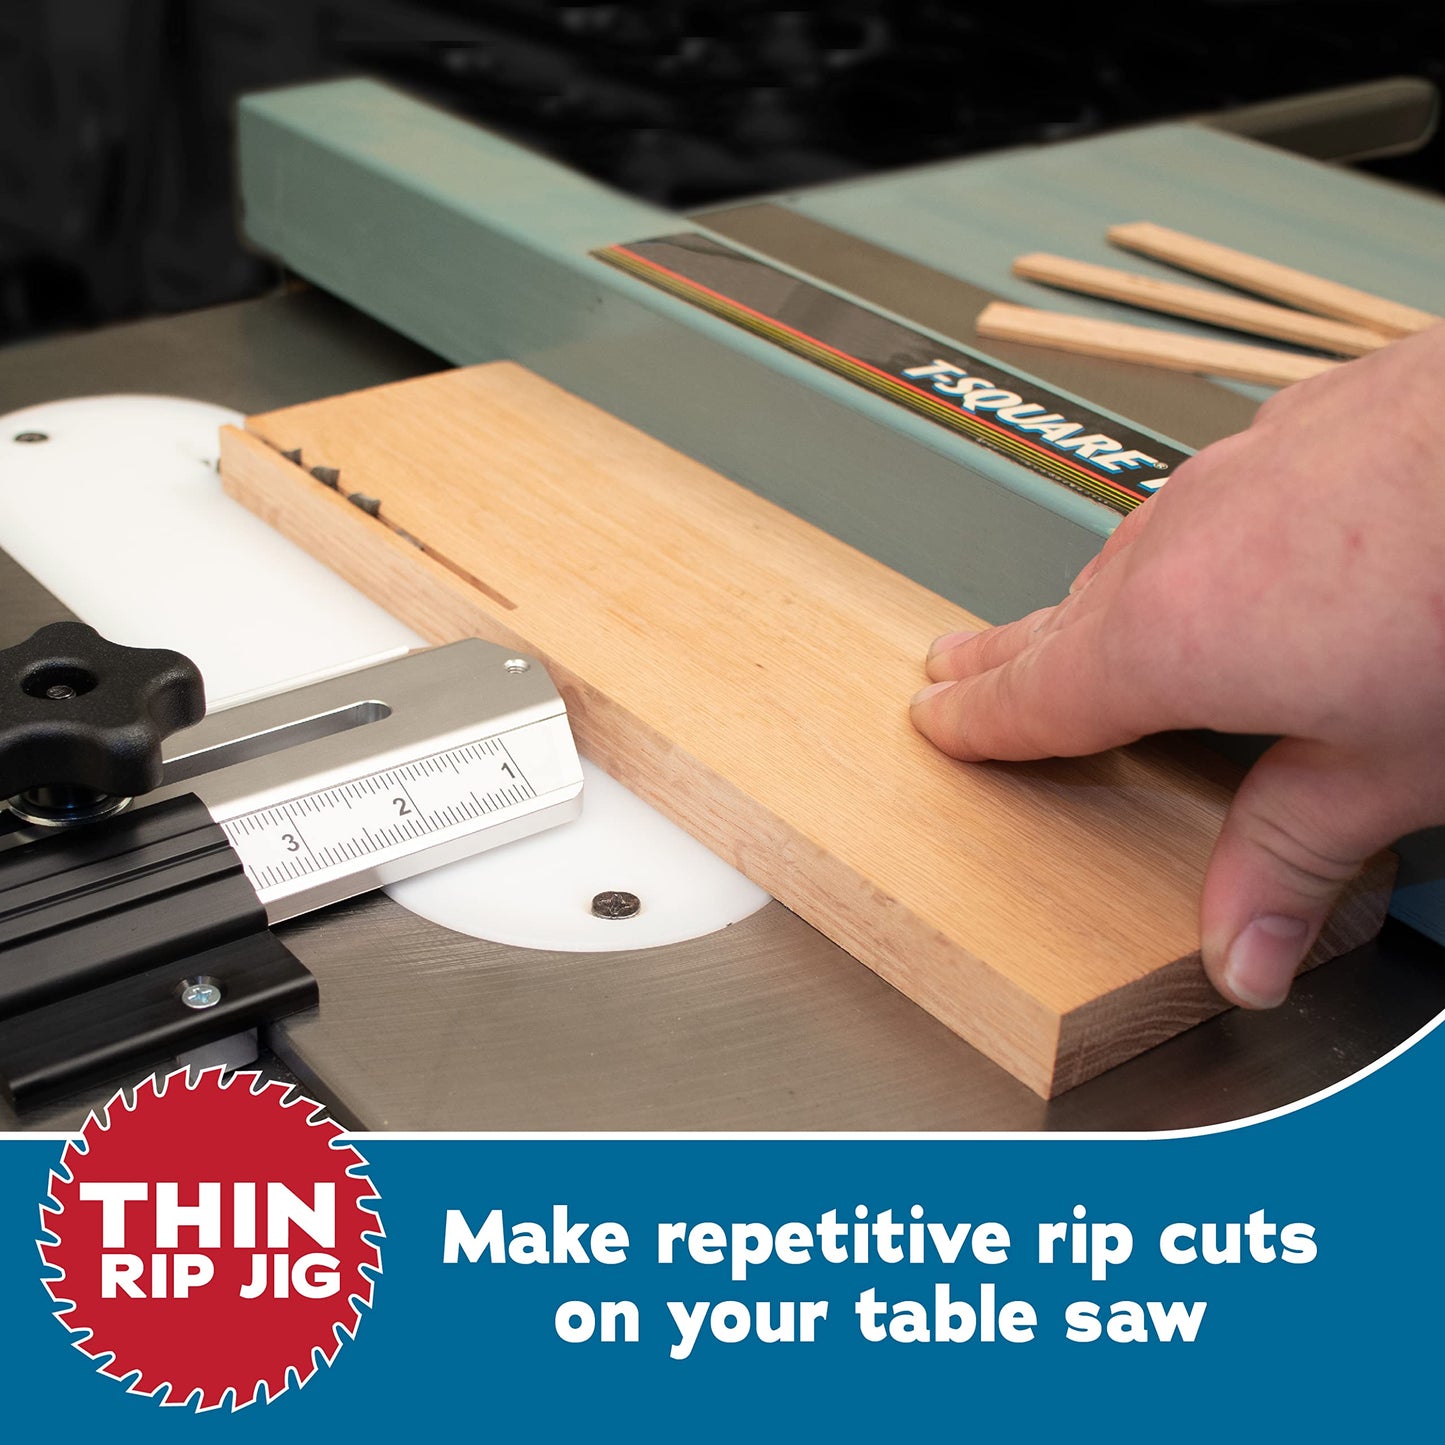 Thin Rip Jig Table Saw Jig for Making Repetitive Narrow Strip Cuts on Table Saws with 3/4" x 3/8" Miter Slots • Also Works with Many Router Tables